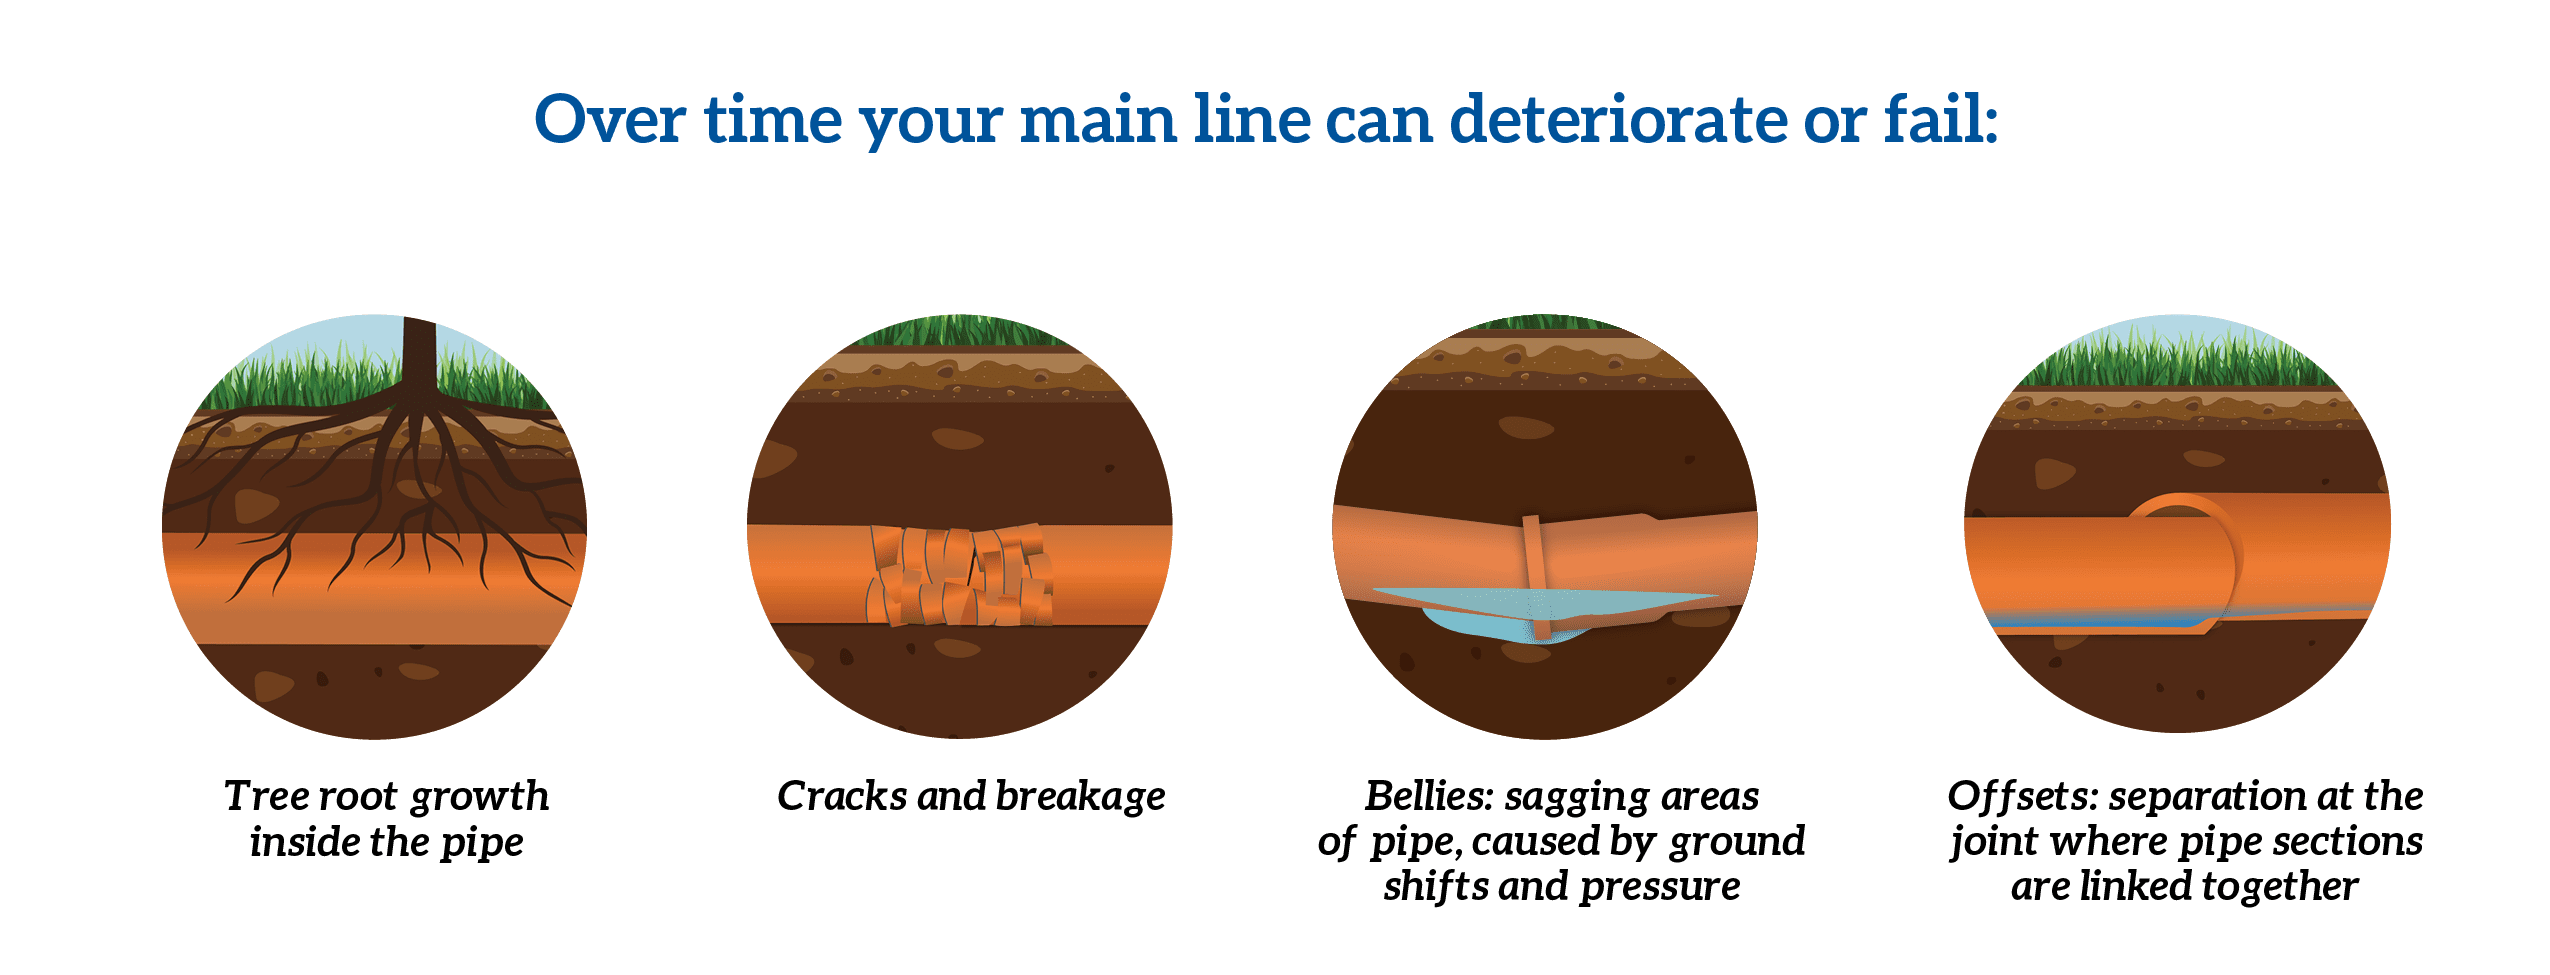 Graphic of how main lines can deteriorate over time